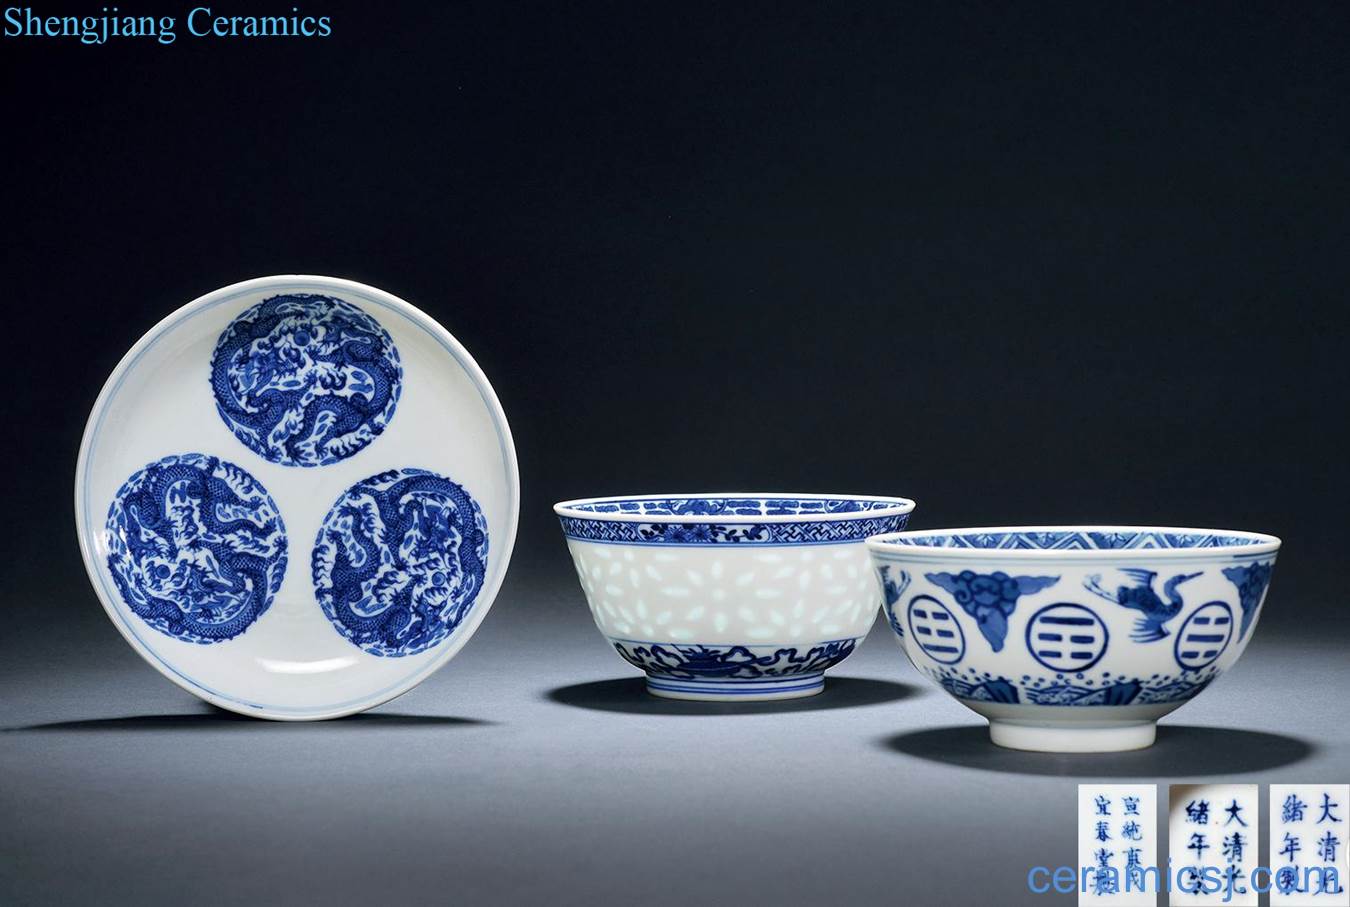 - xuantong reign of qing emperor guangxu Blue and white dragon, James t. c. na was published, mass of longpan, bowl (three)